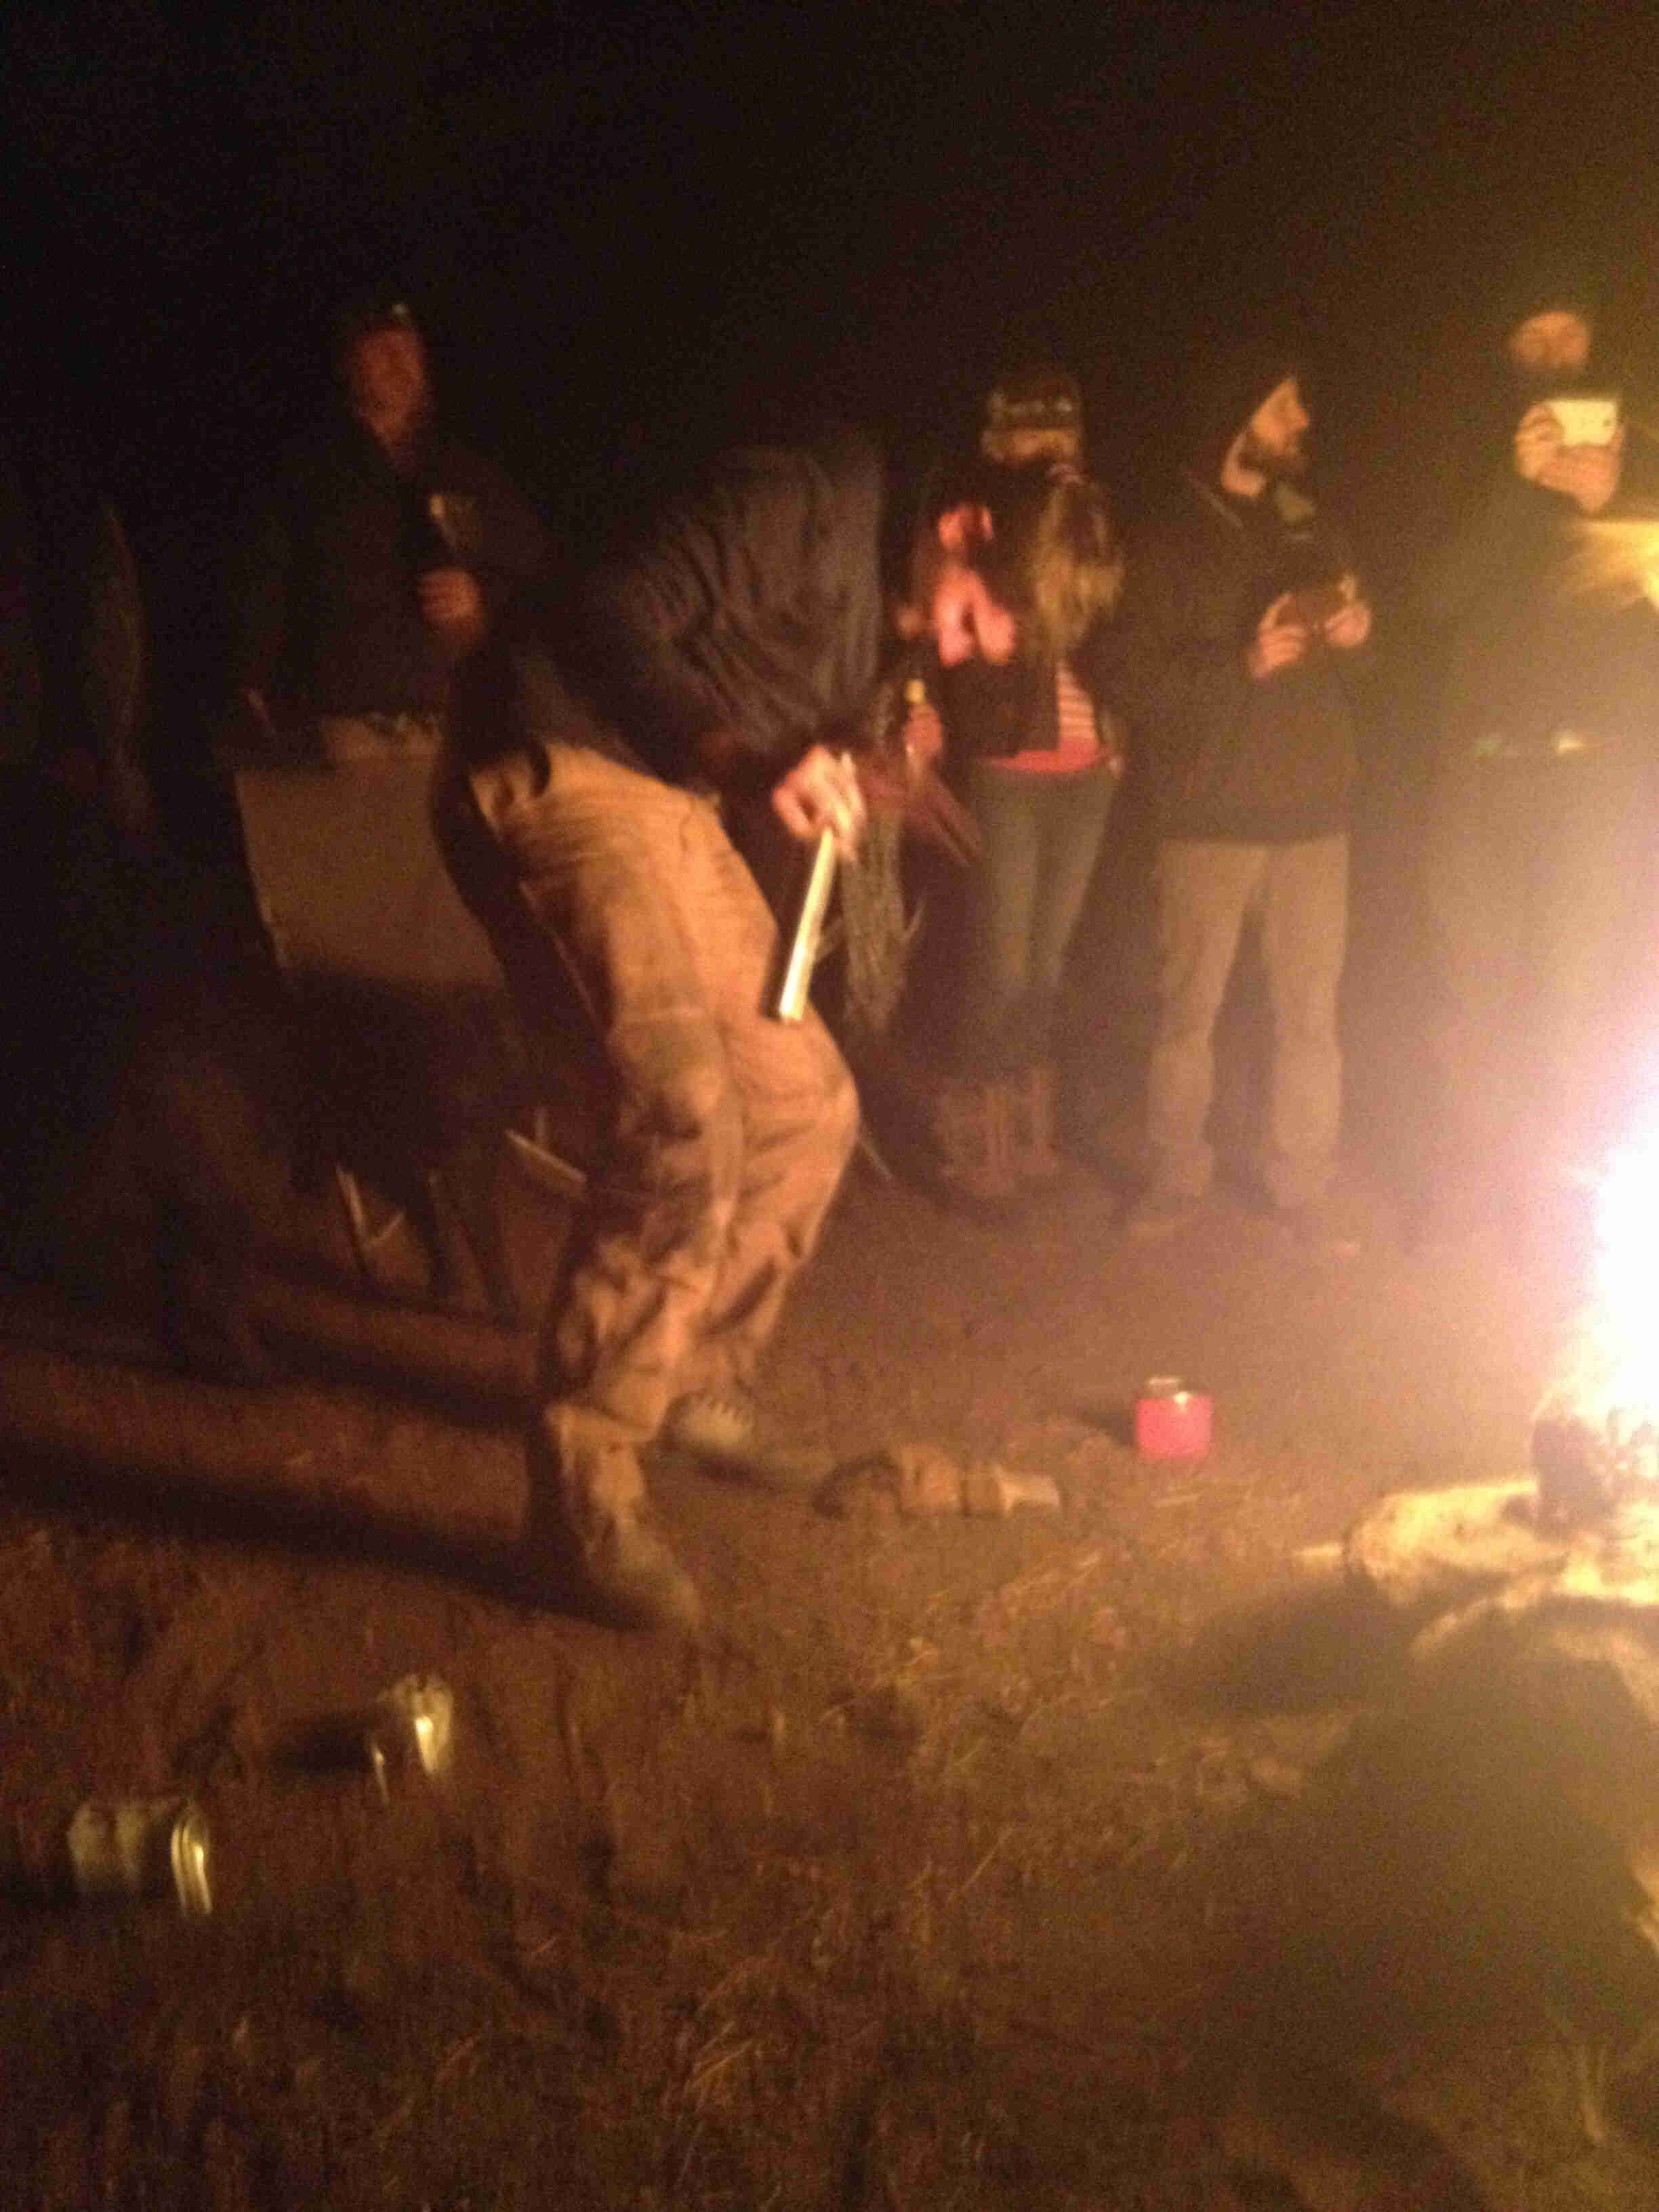 A person dancing next to a campfire at night, with others standing around in the background